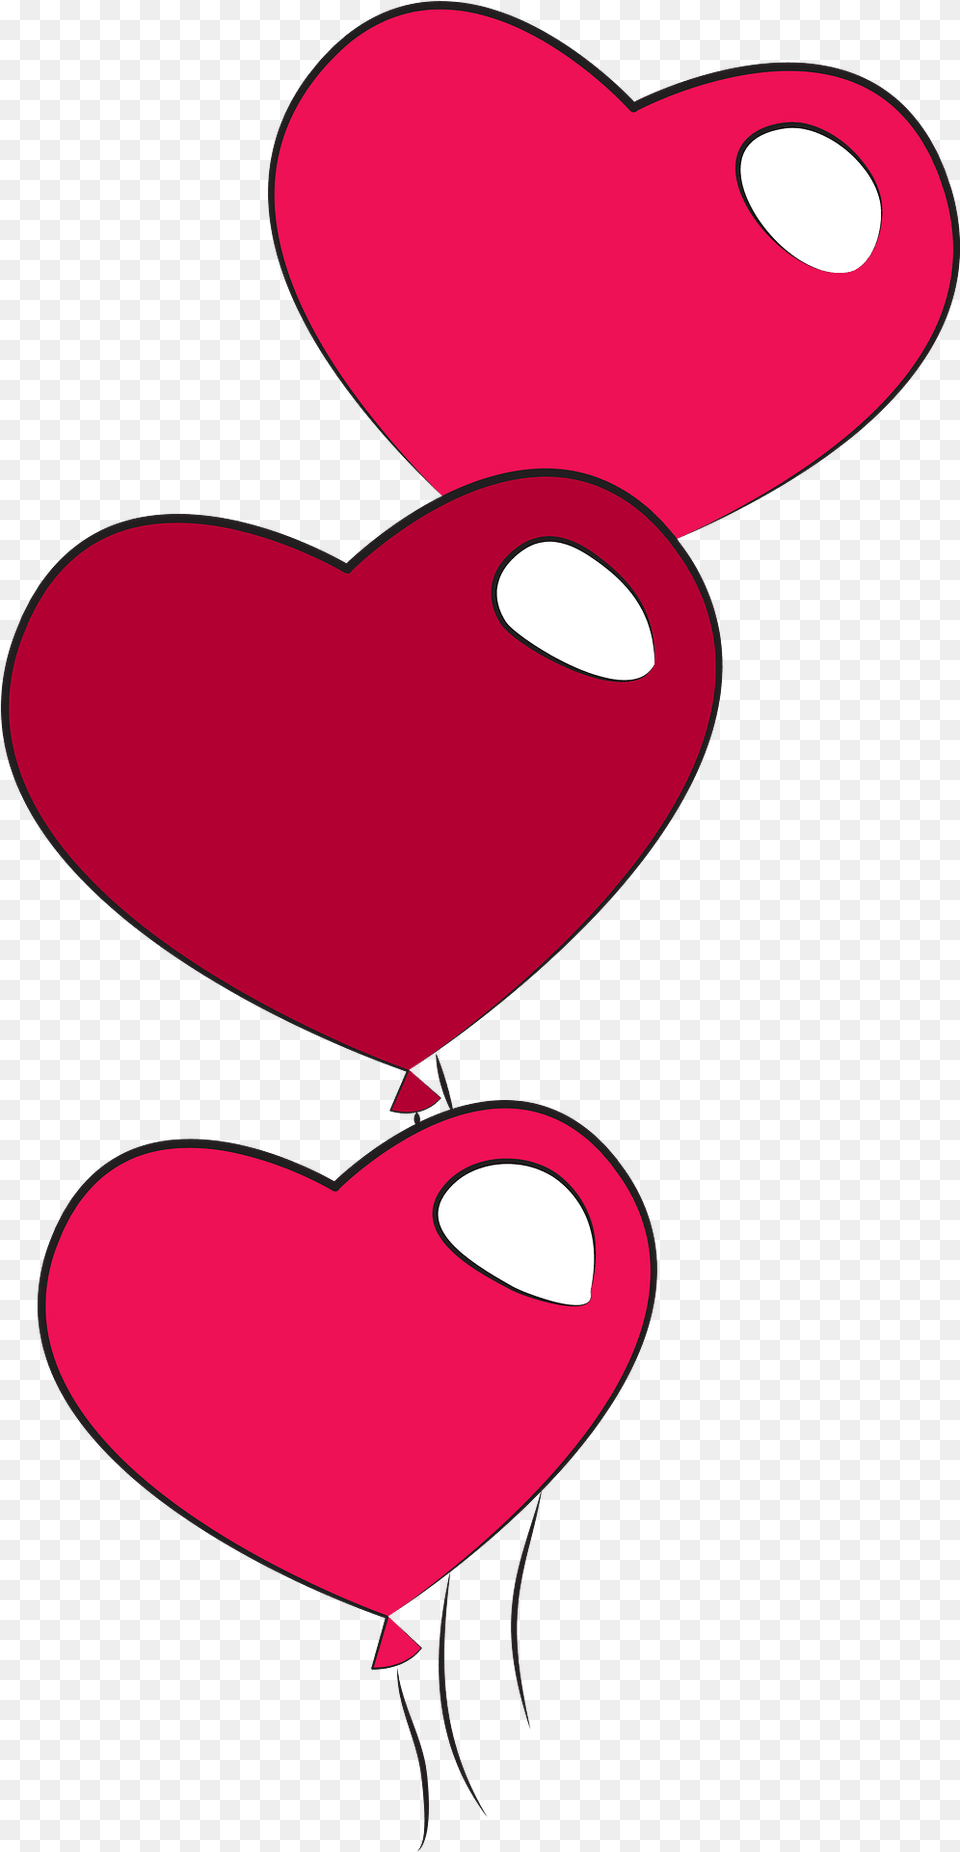 Heart Shaped Balloons Clipart Download Transparent Heart Shaped Balloon Clipart Free Png